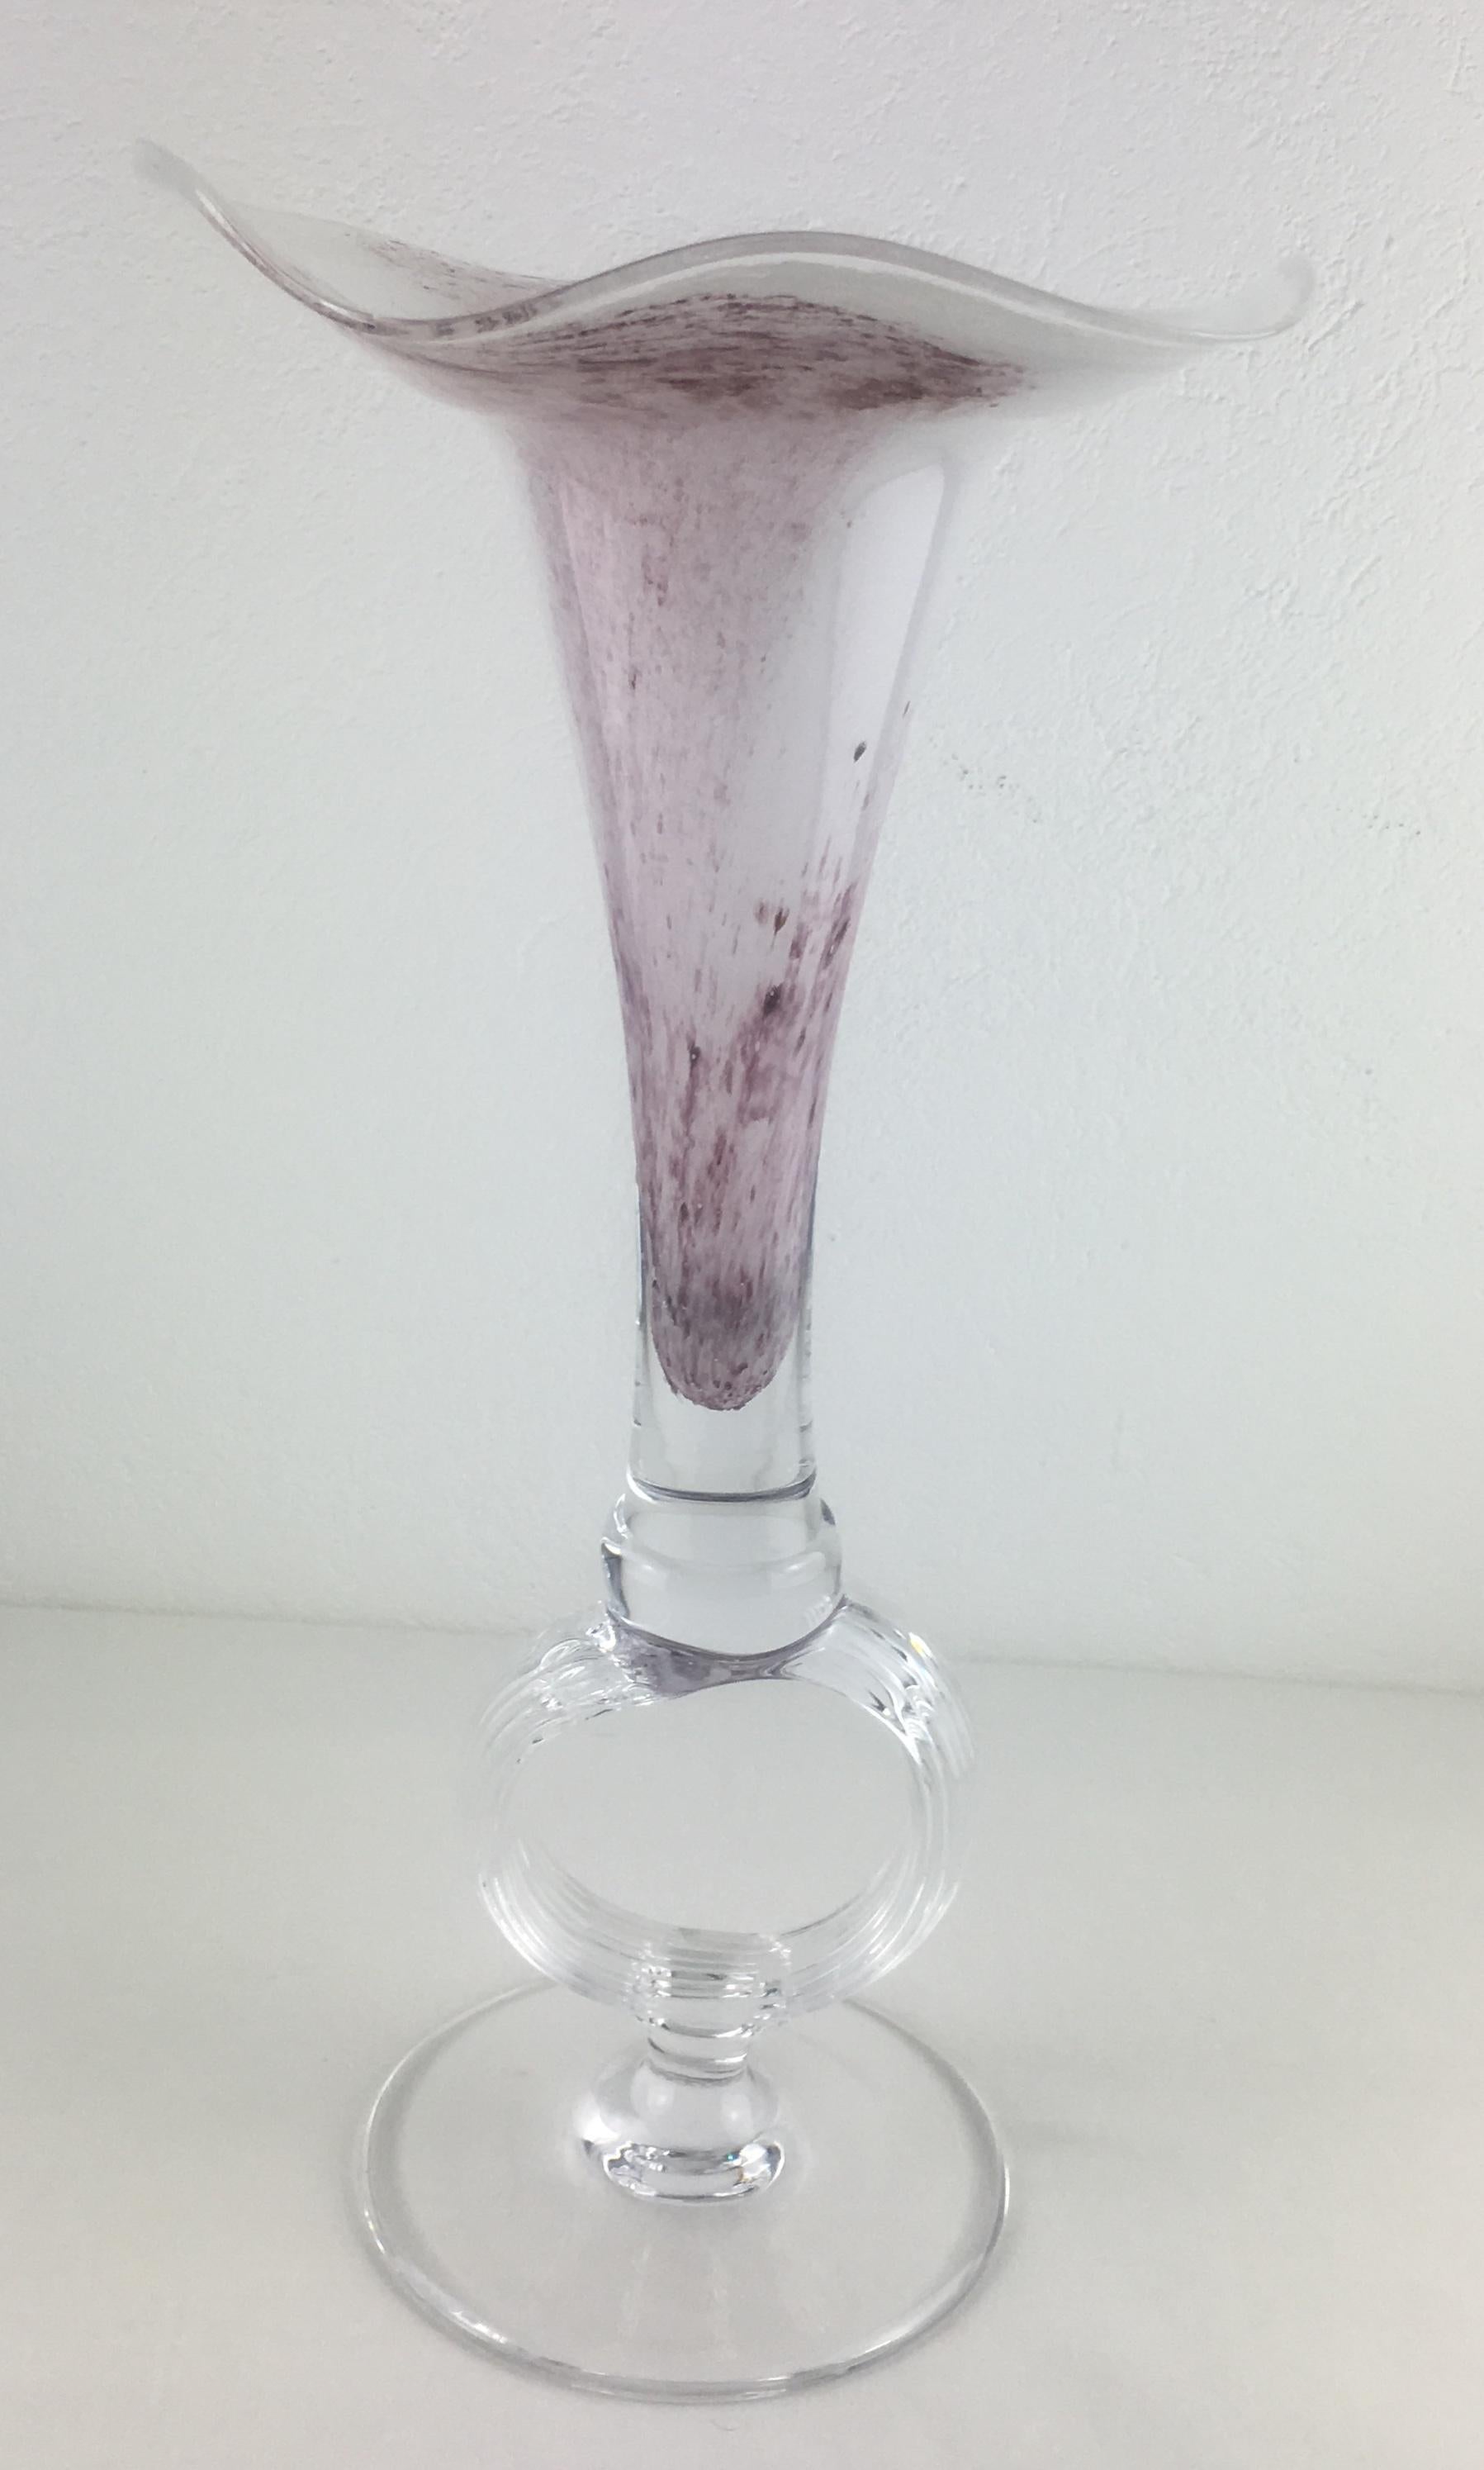 Handblown Tall Glass Centerpiece Epergne from Biot France In Good Condition For Sale In Miami, FL